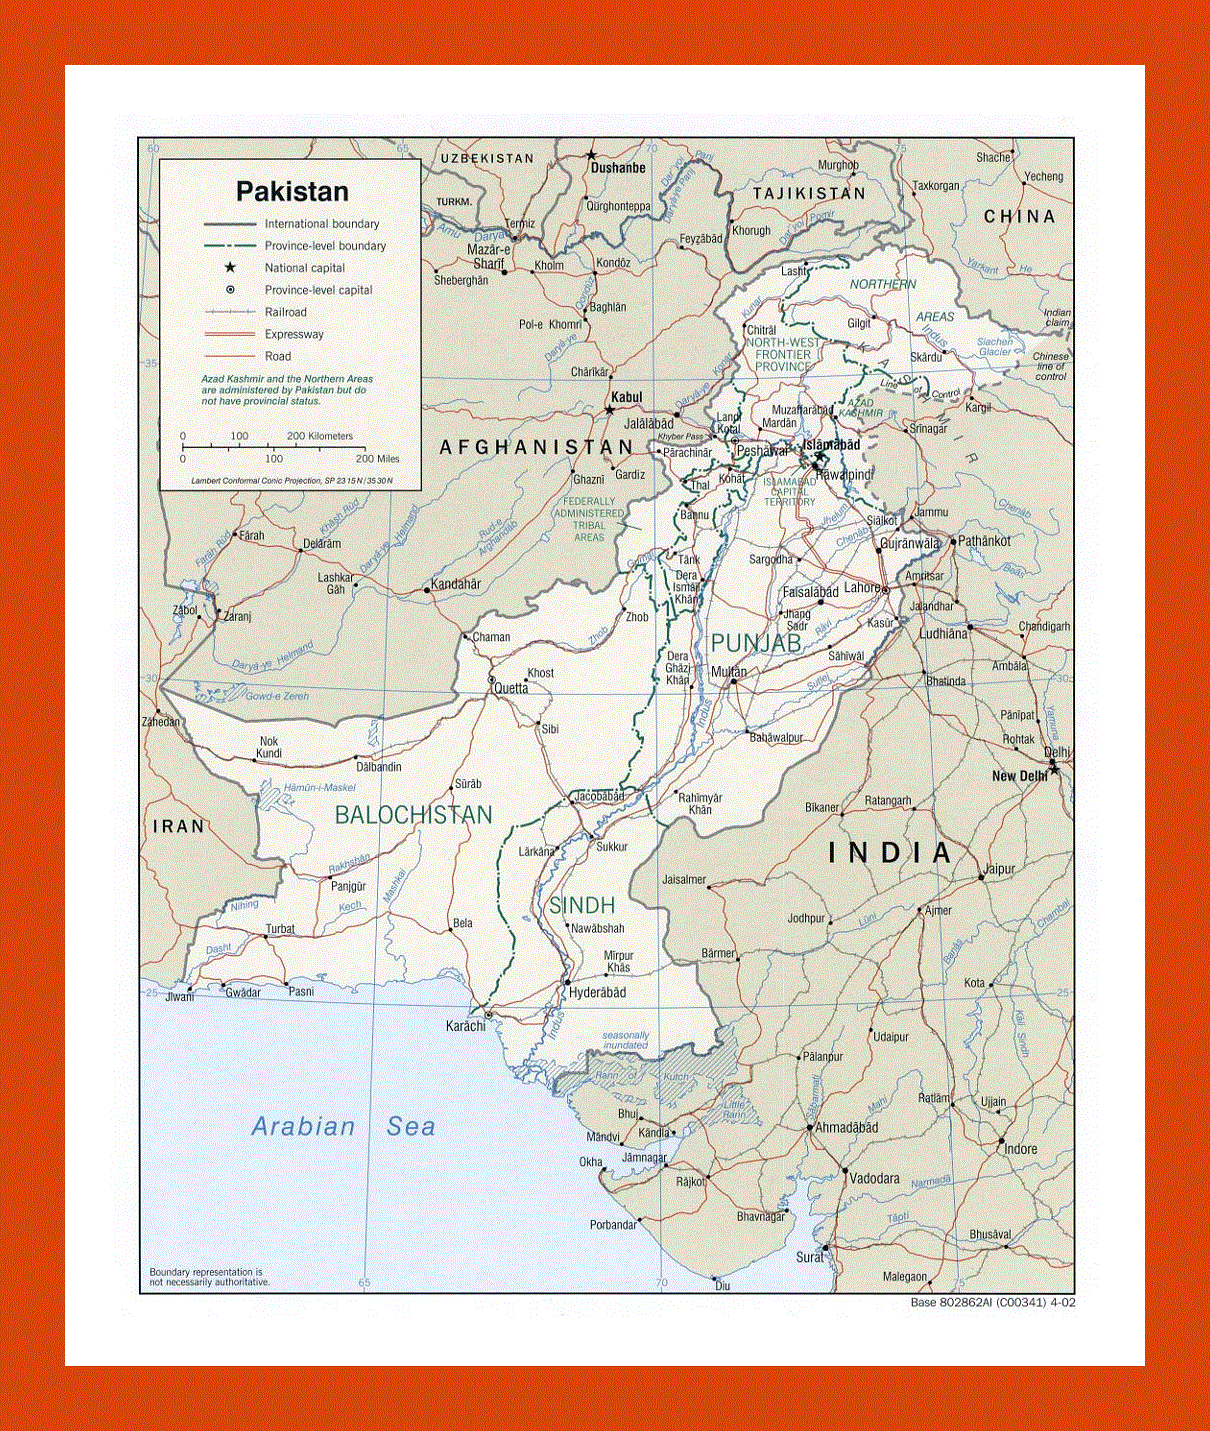 Political and administrative map of Pakistan - 2002